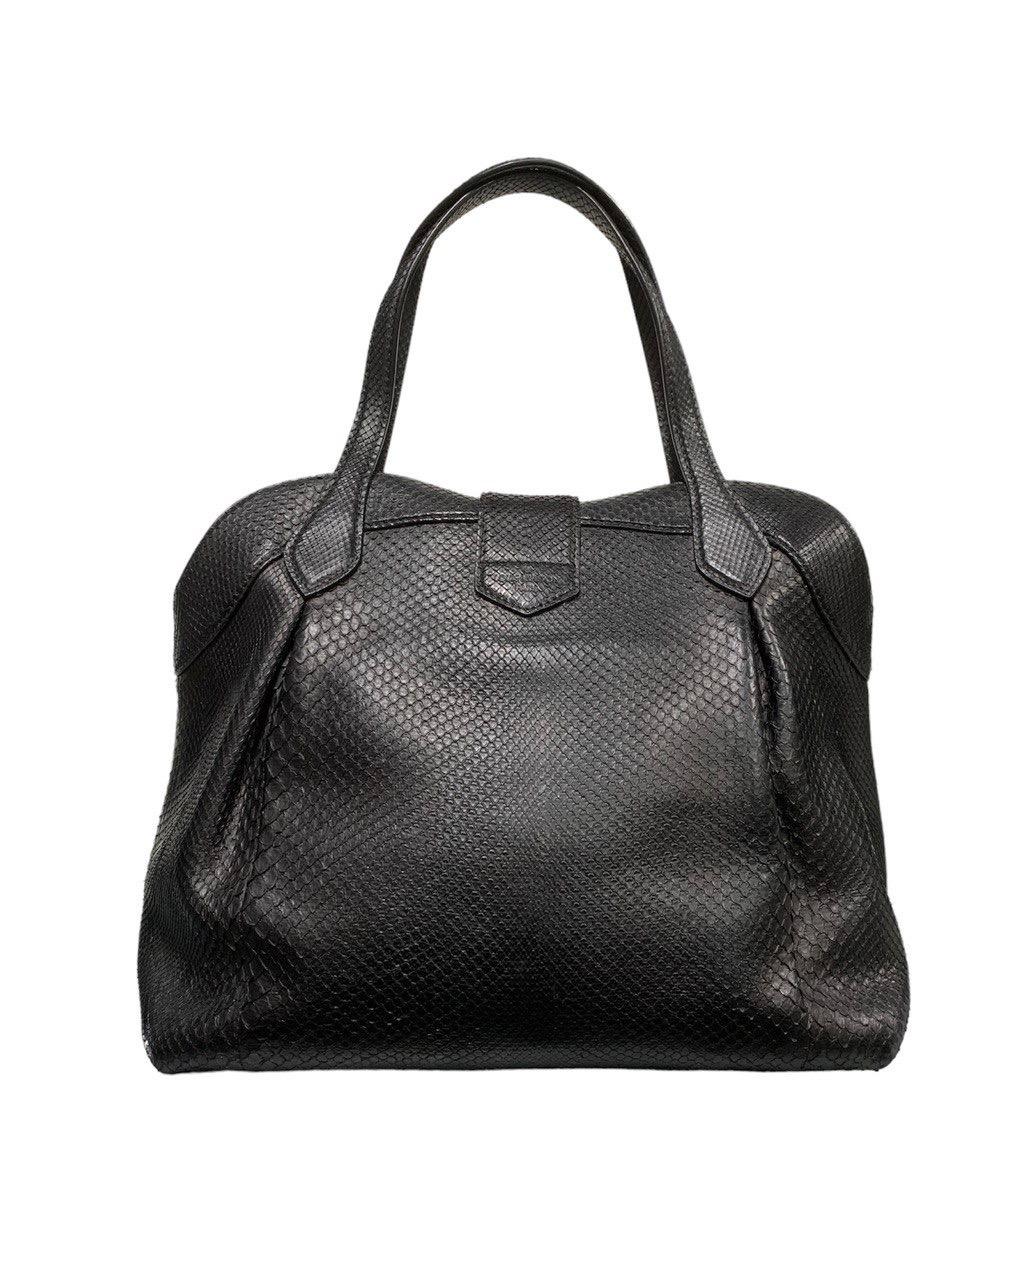 Louis Vuitton Mahina Cirrus Black Piton Top Handle Bag In Excellent Condition For Sale In Torre Del Greco, IT